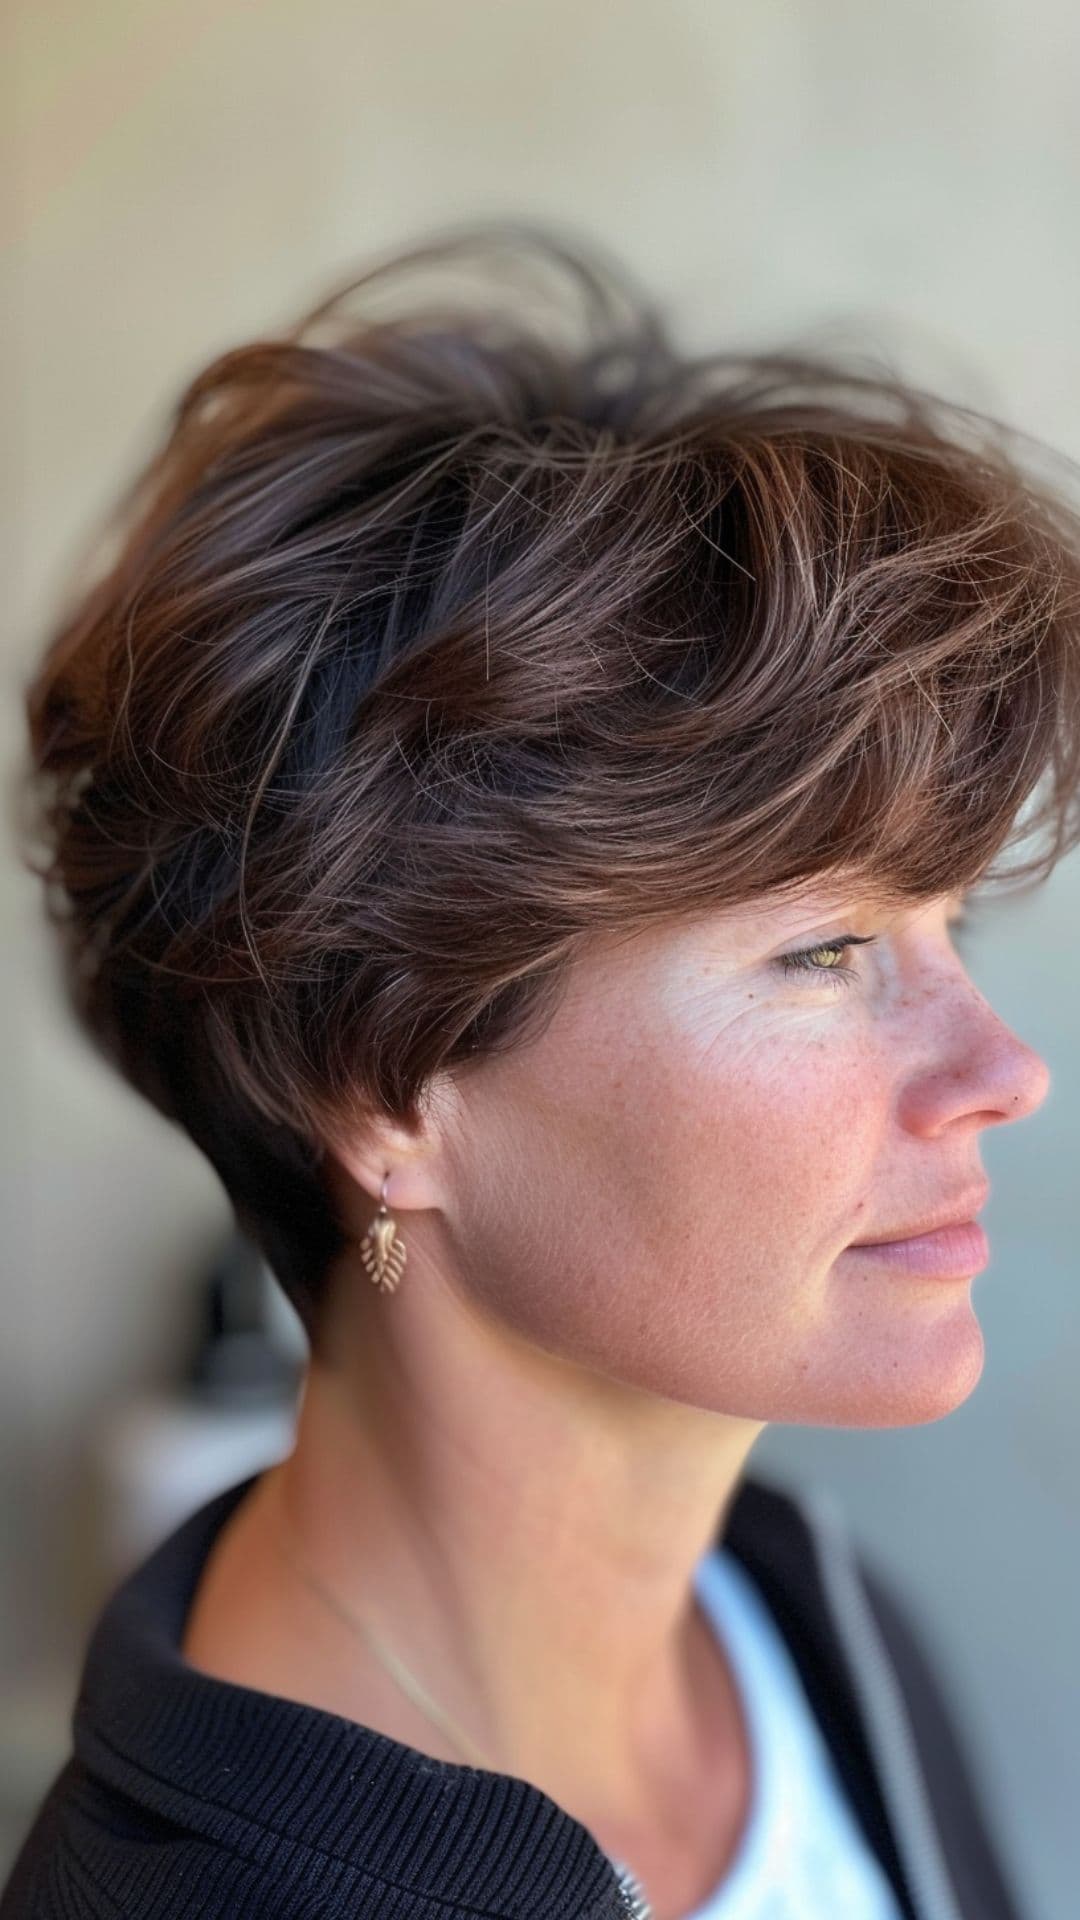 A woman modelling a short chocolate brown hair.